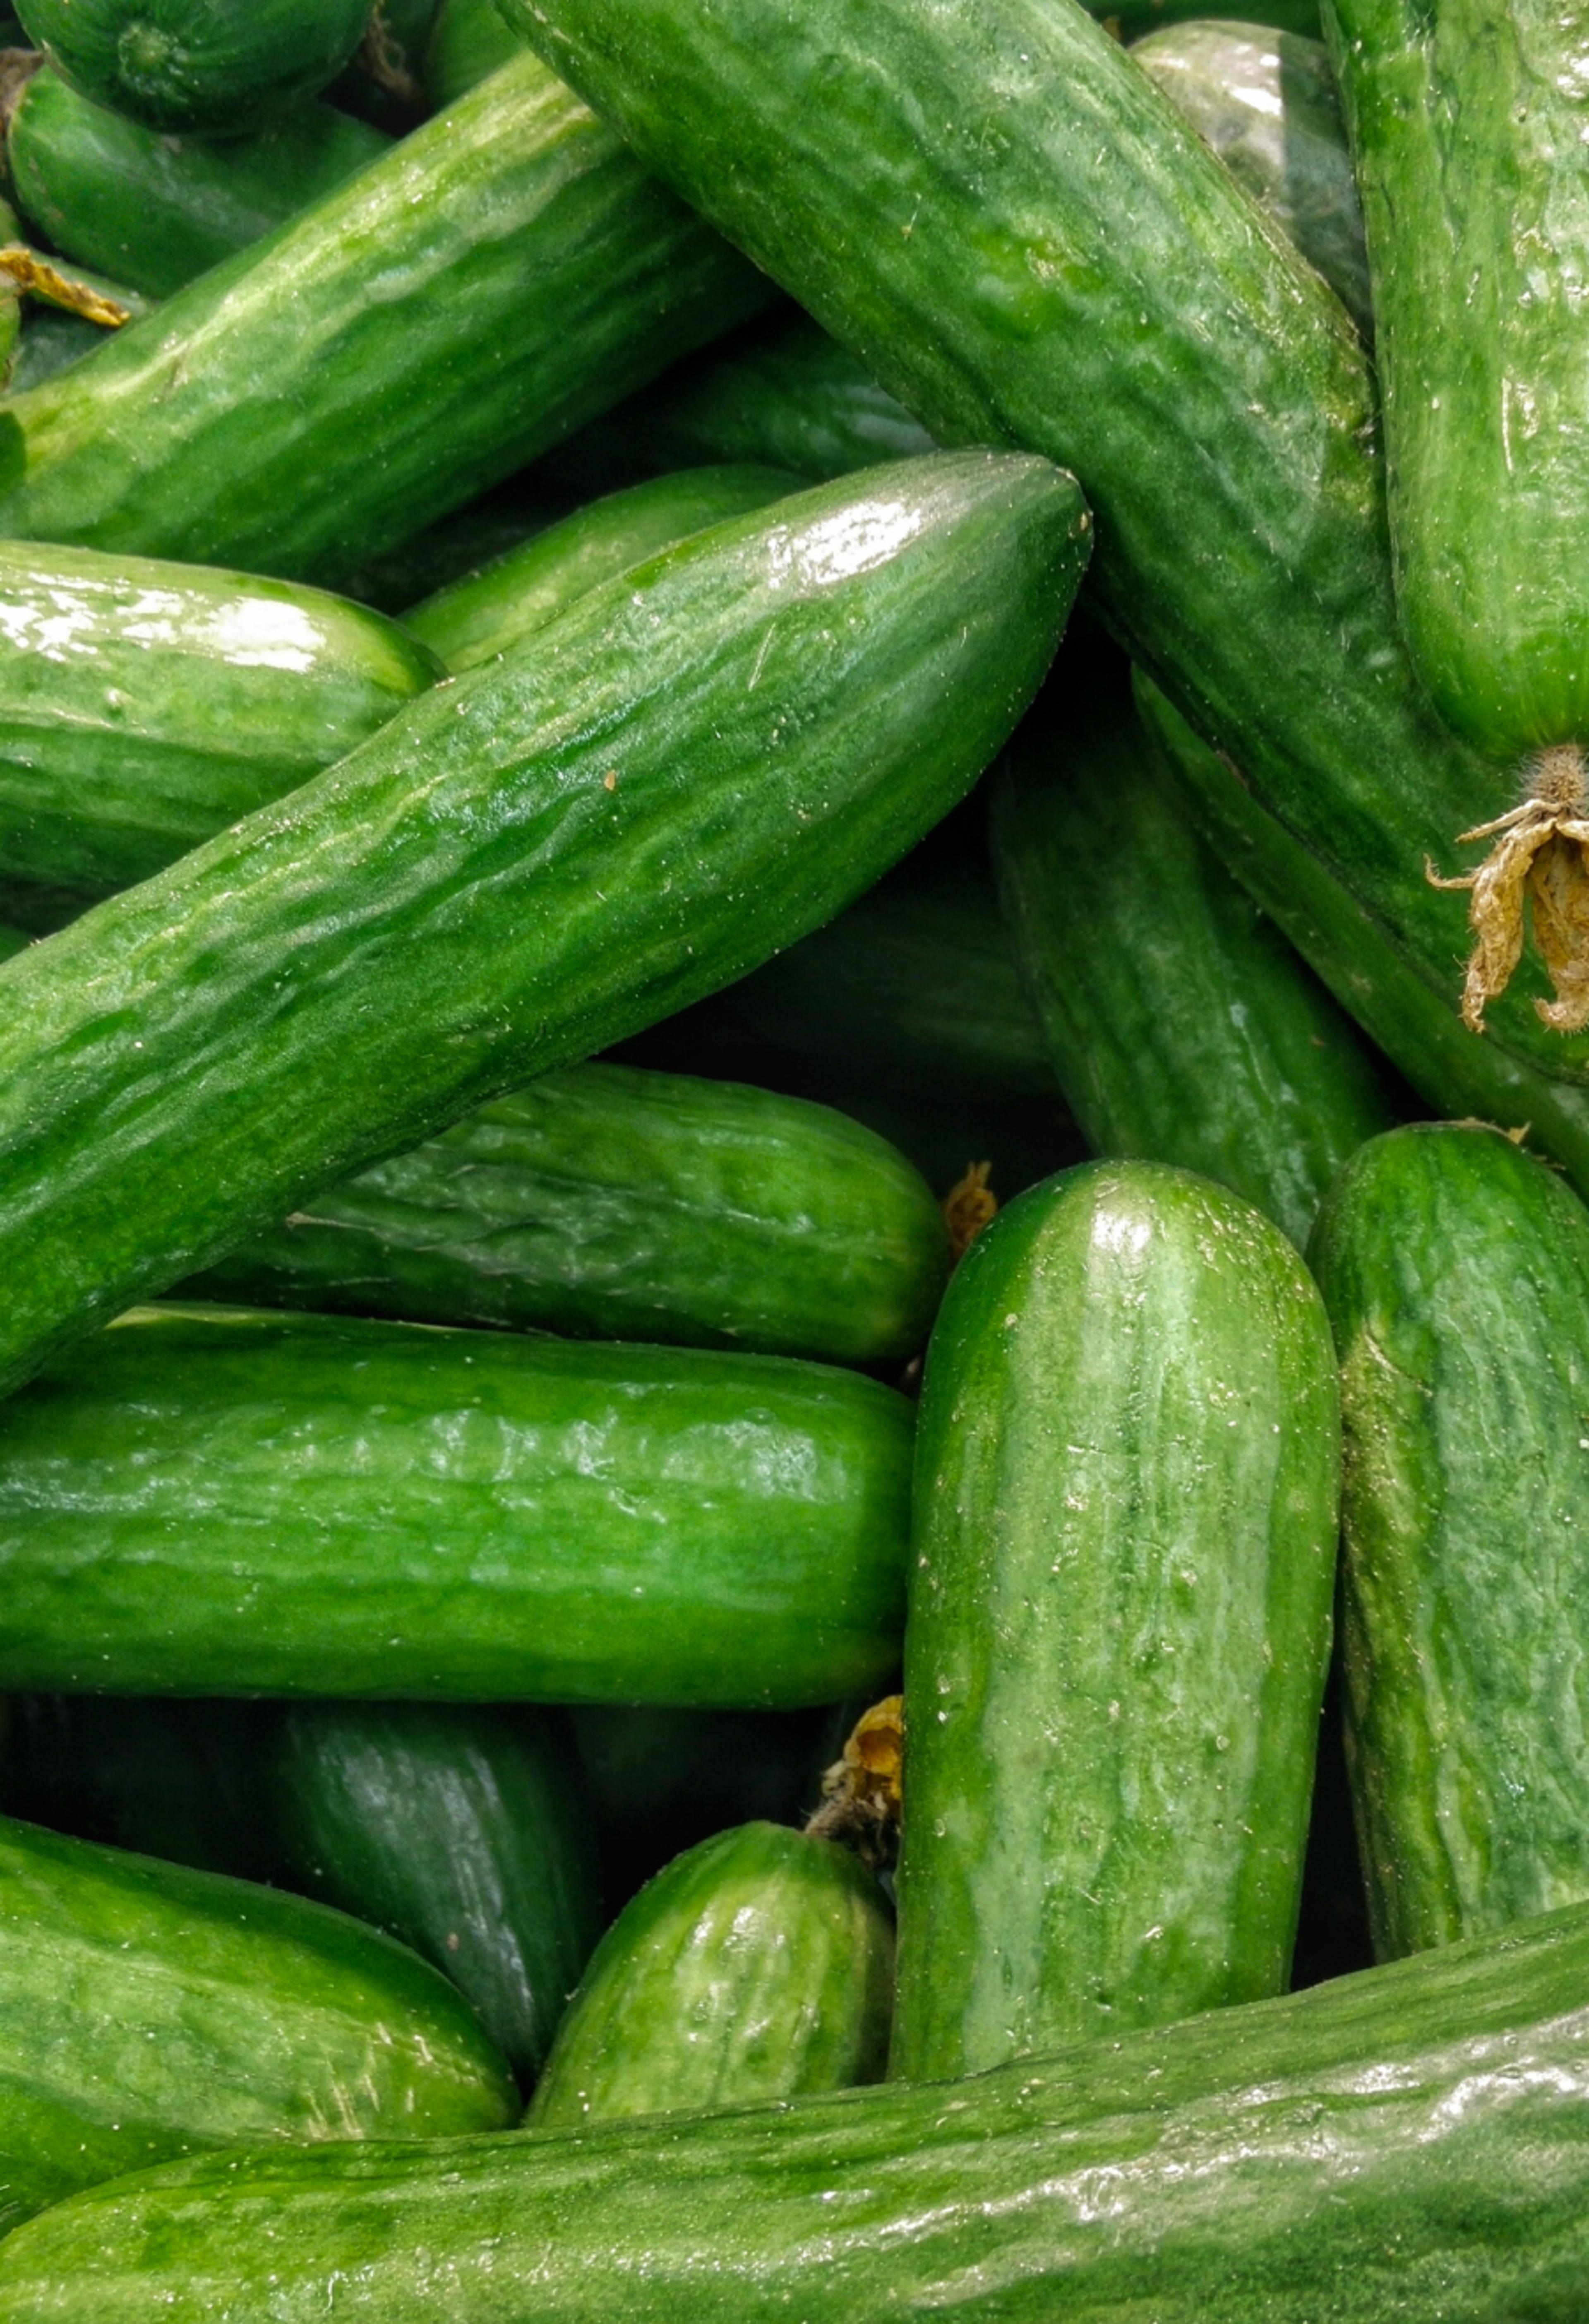 A close up of a pile of cucumbers.